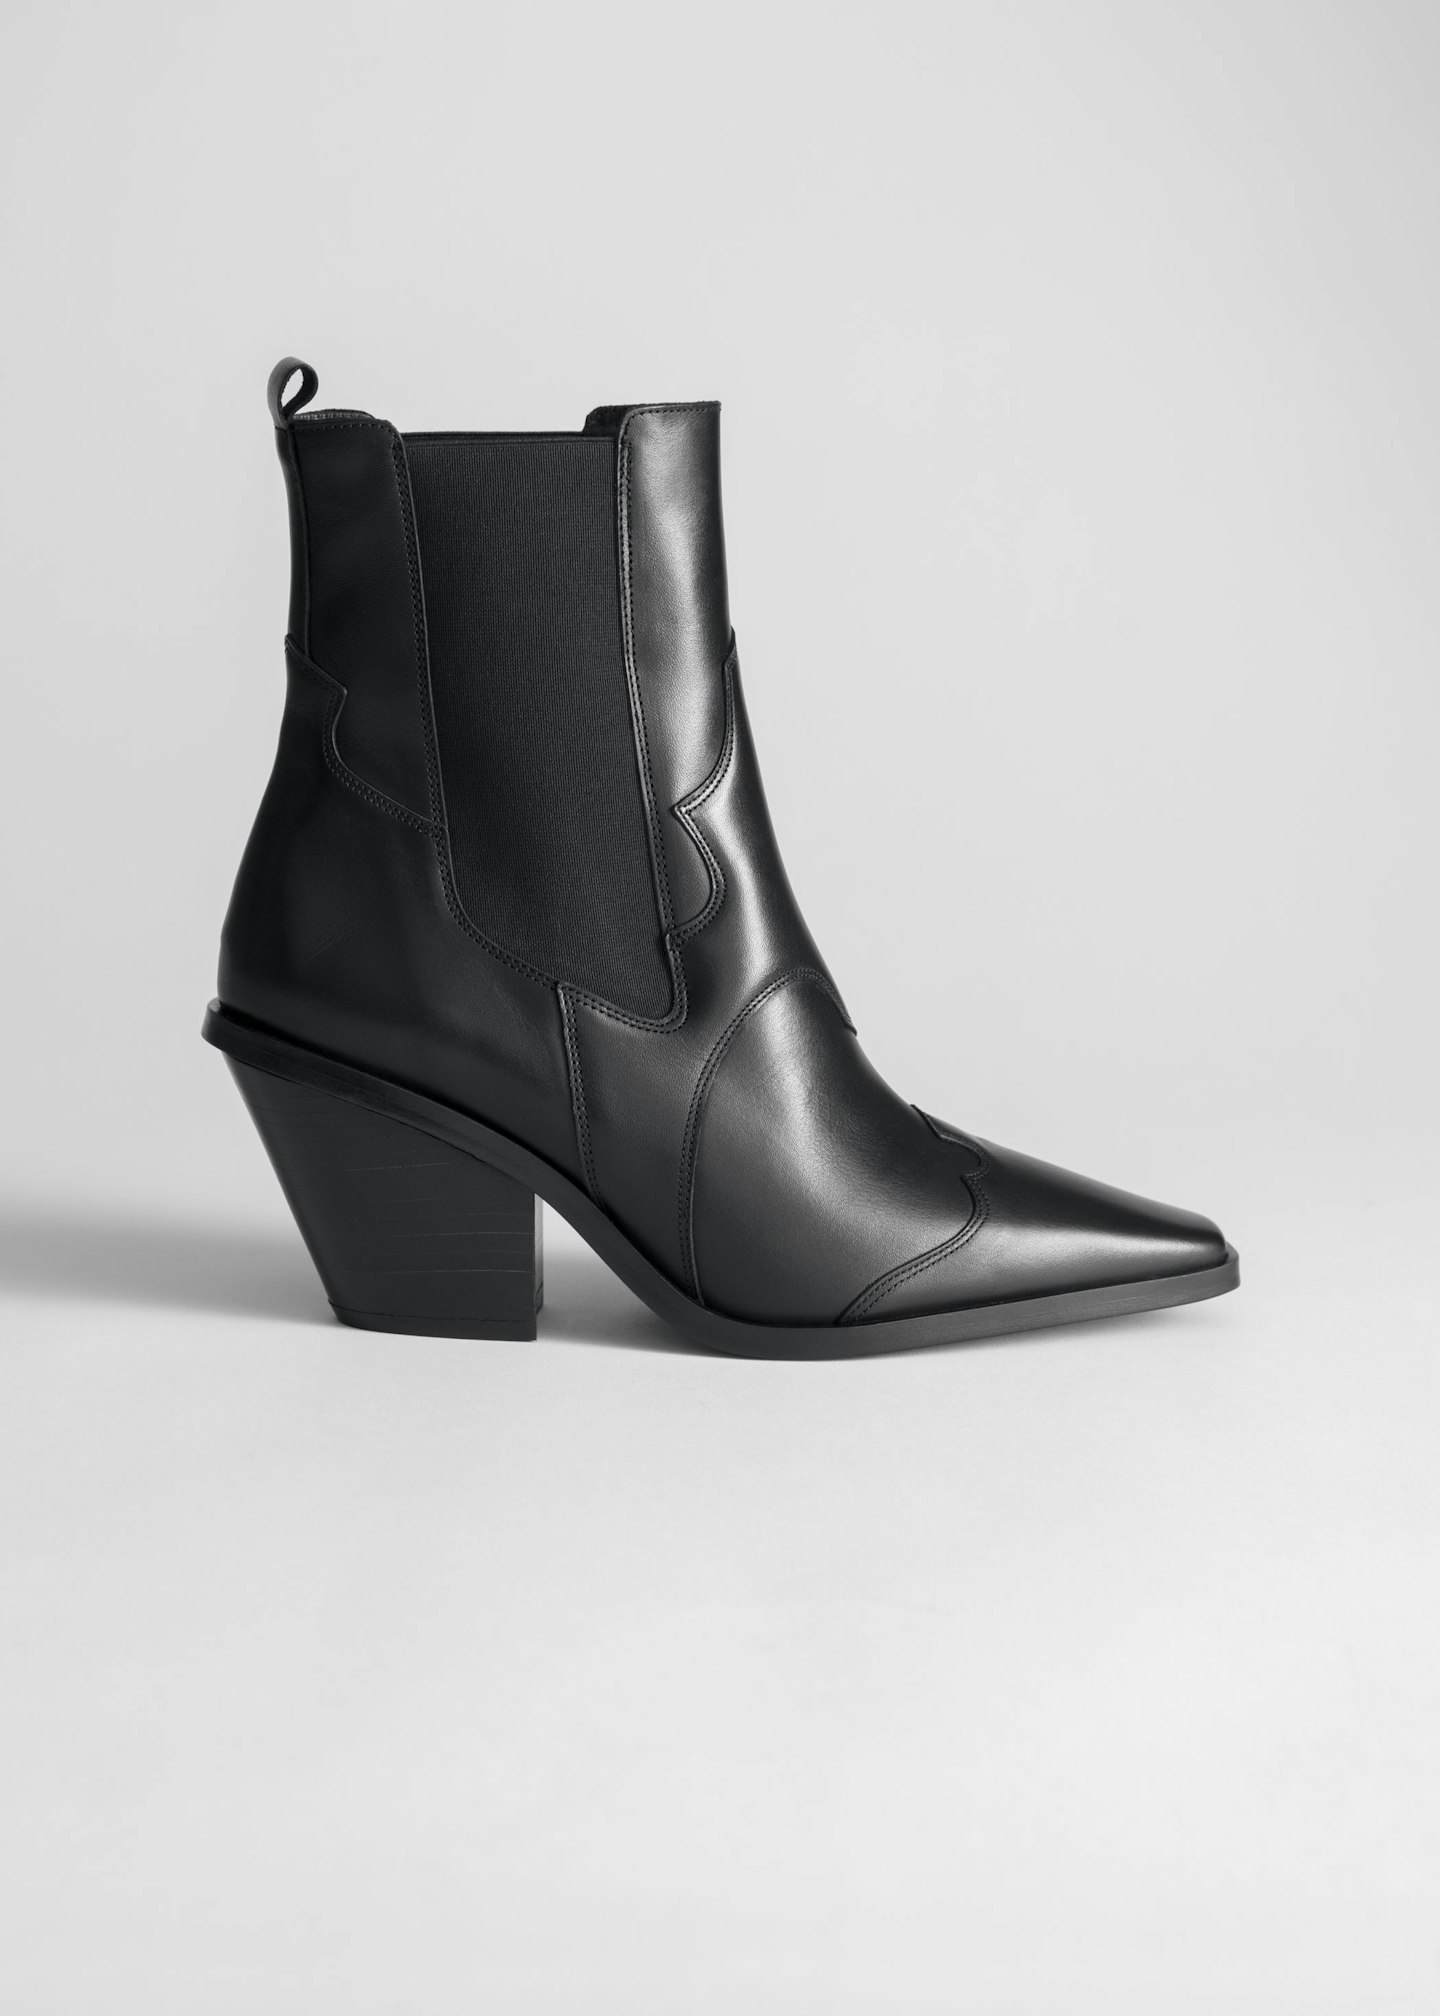 & Other Stories Square Toe Leather Cowboy Boots